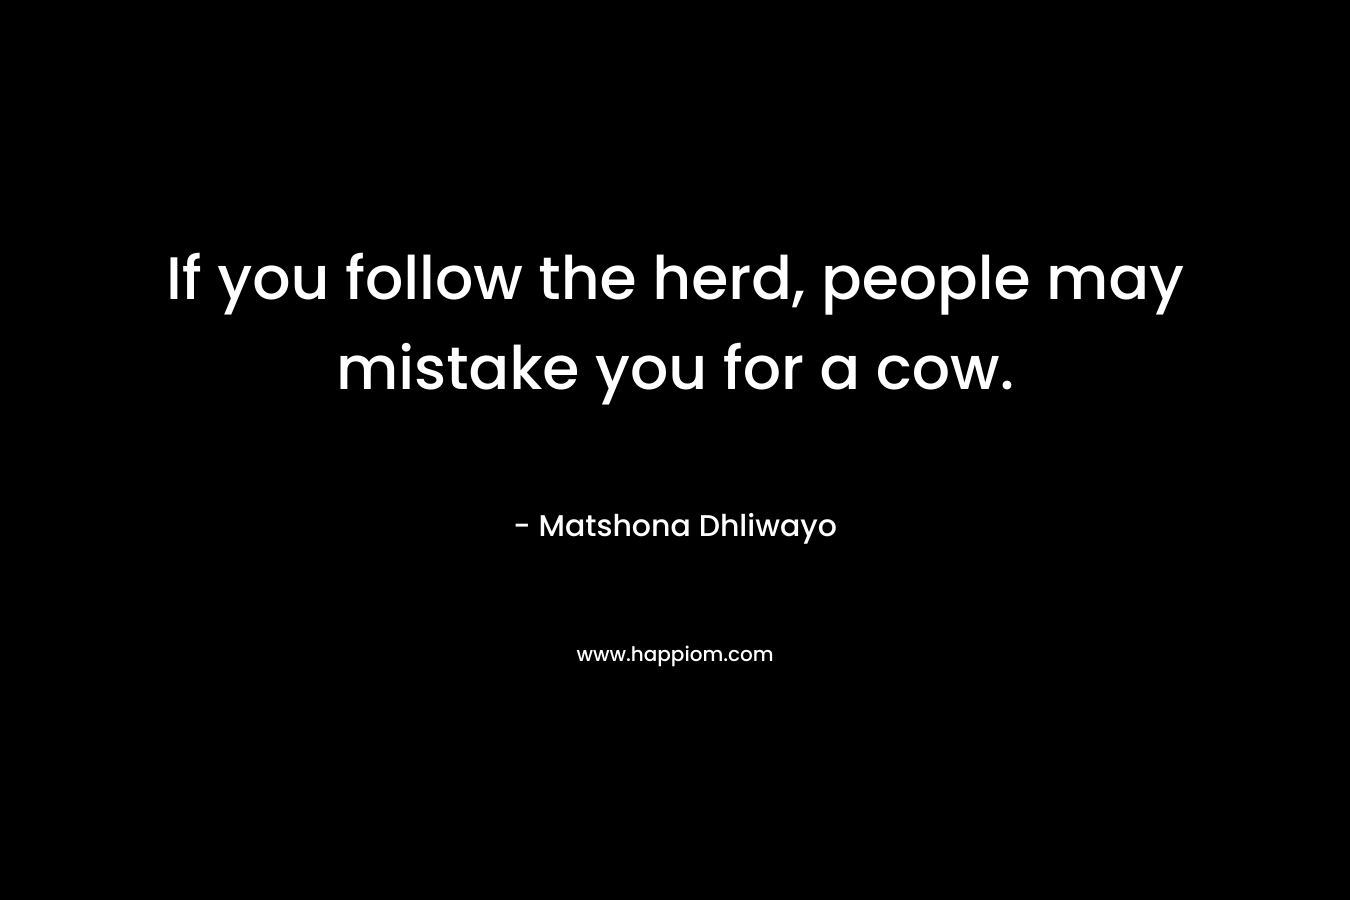 If you follow the herd, people may mistake you for a cow. – Matshona Dhliwayo